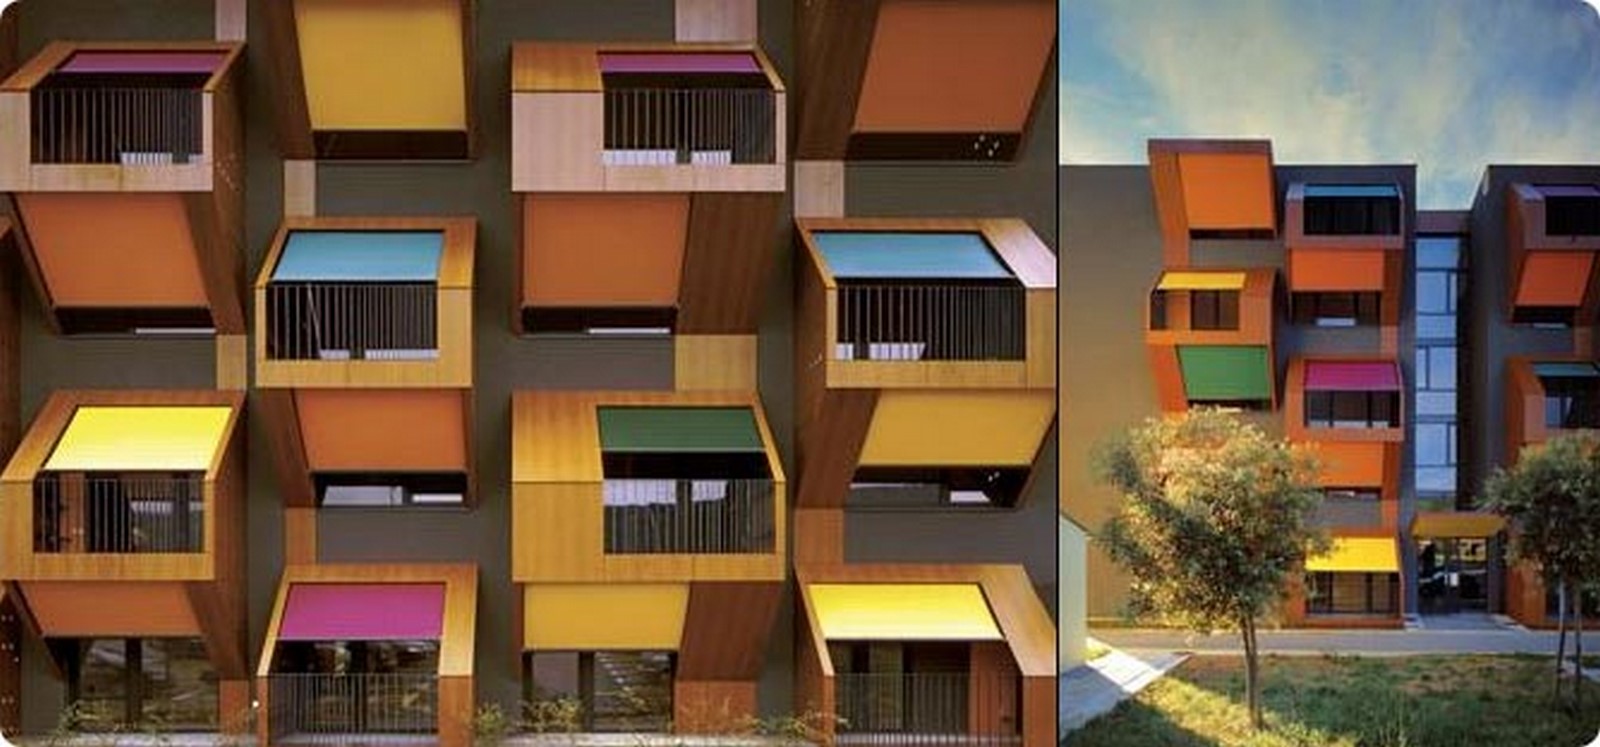 10 Examples of unique balcony architecture - Sheet2